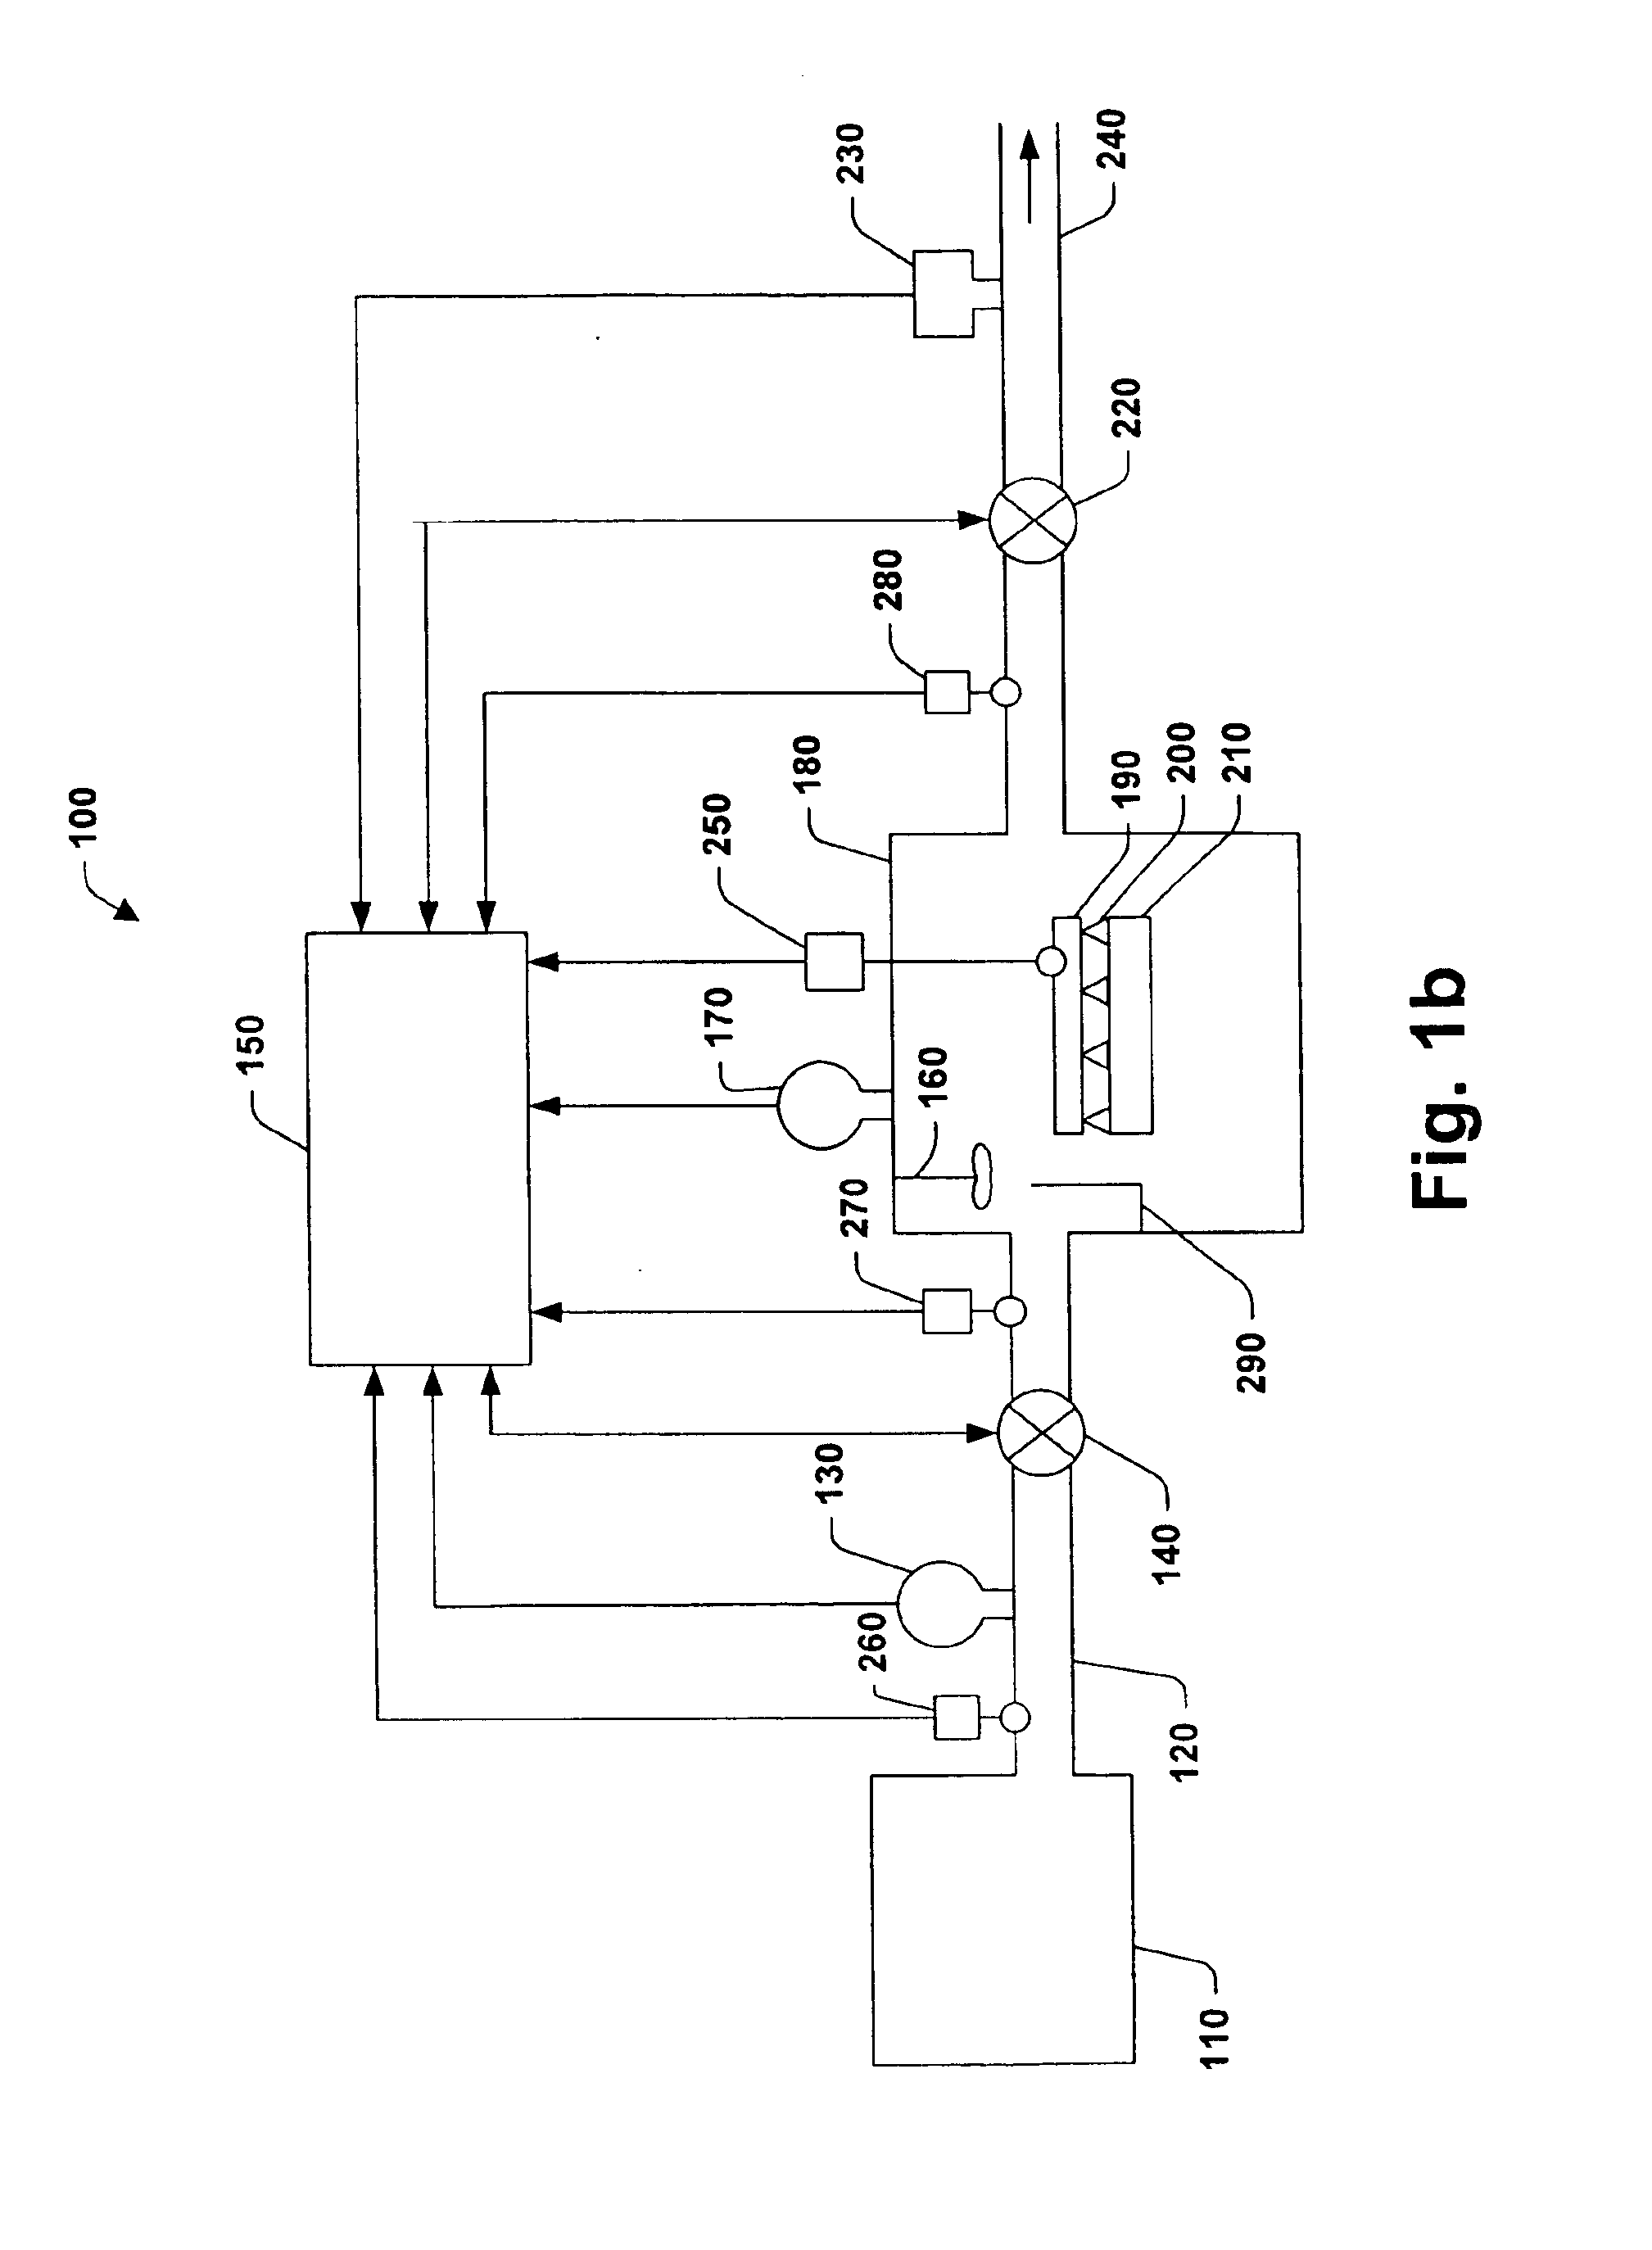 System for rapidly and uniformly cooling resist